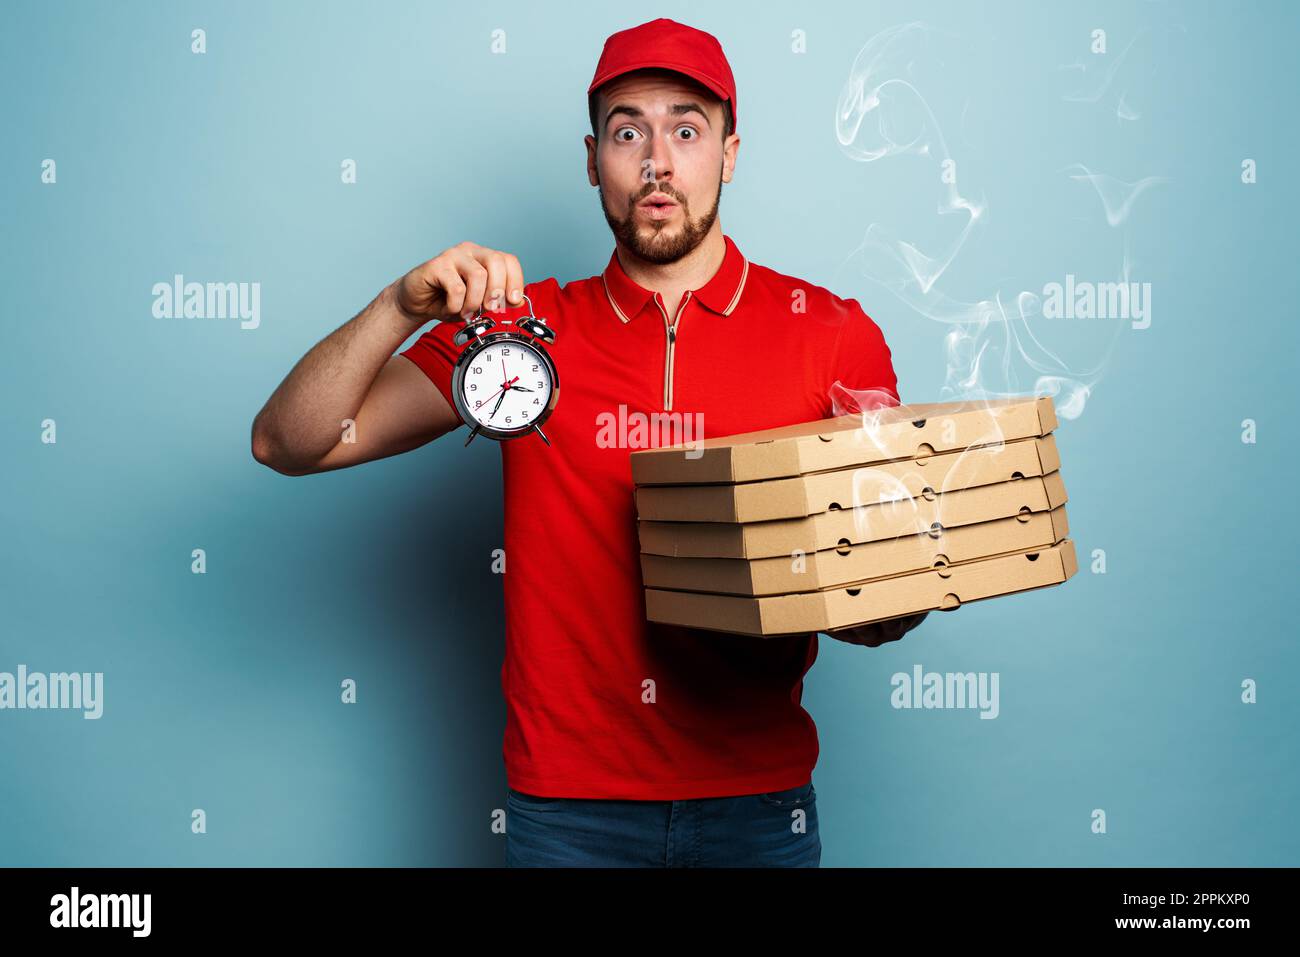 Courier is punctual to deliver quickly pizzas. Cyan background Stock Photo